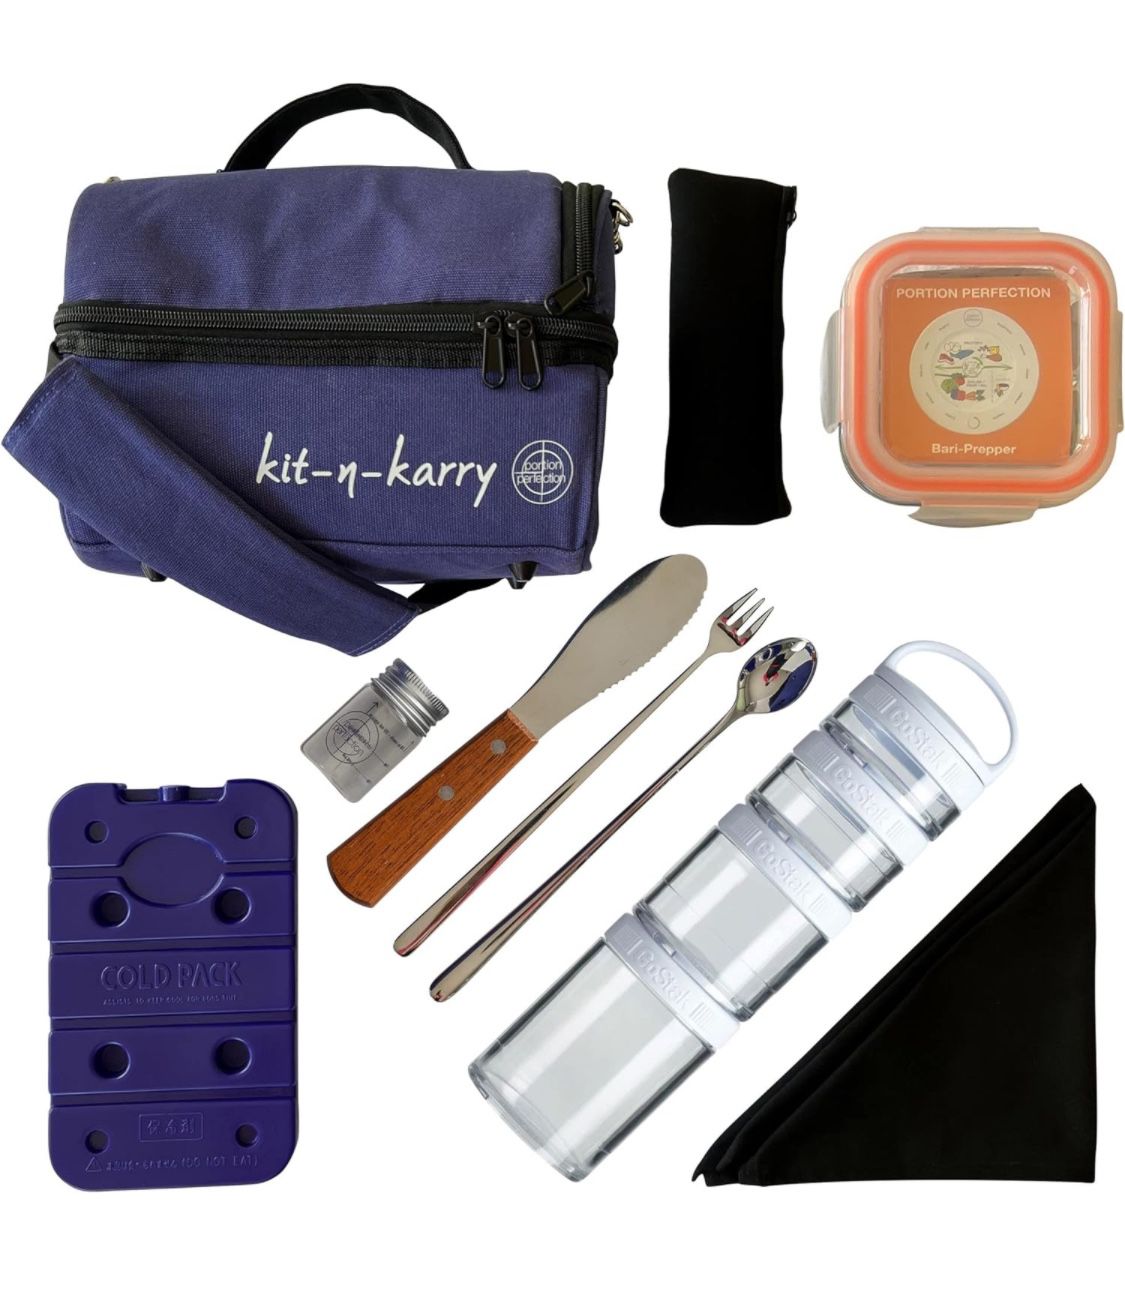 Portion Perfection Kit-N-Karry, Bariatric Surgery Lunch Bag Kit